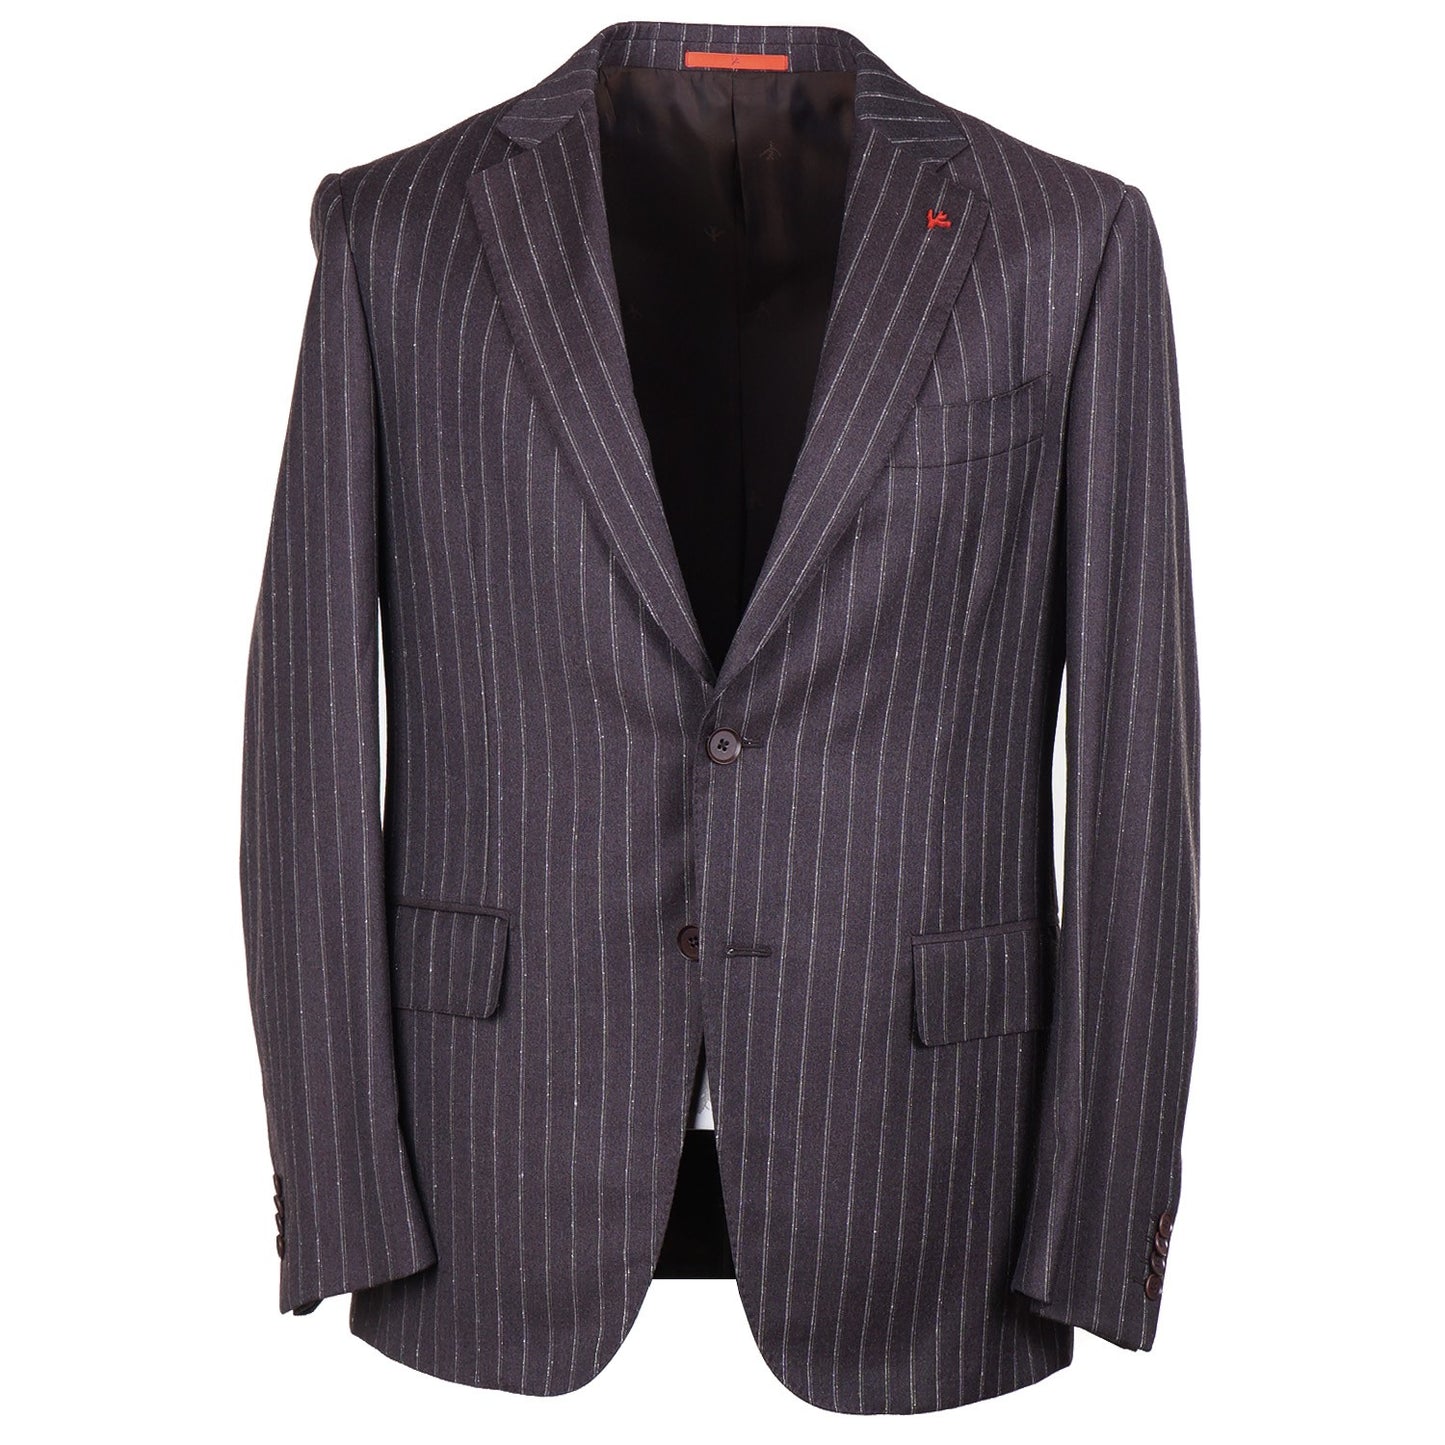 Isaia Striped Super 130s Wool Suit - Top Shelf Apparel